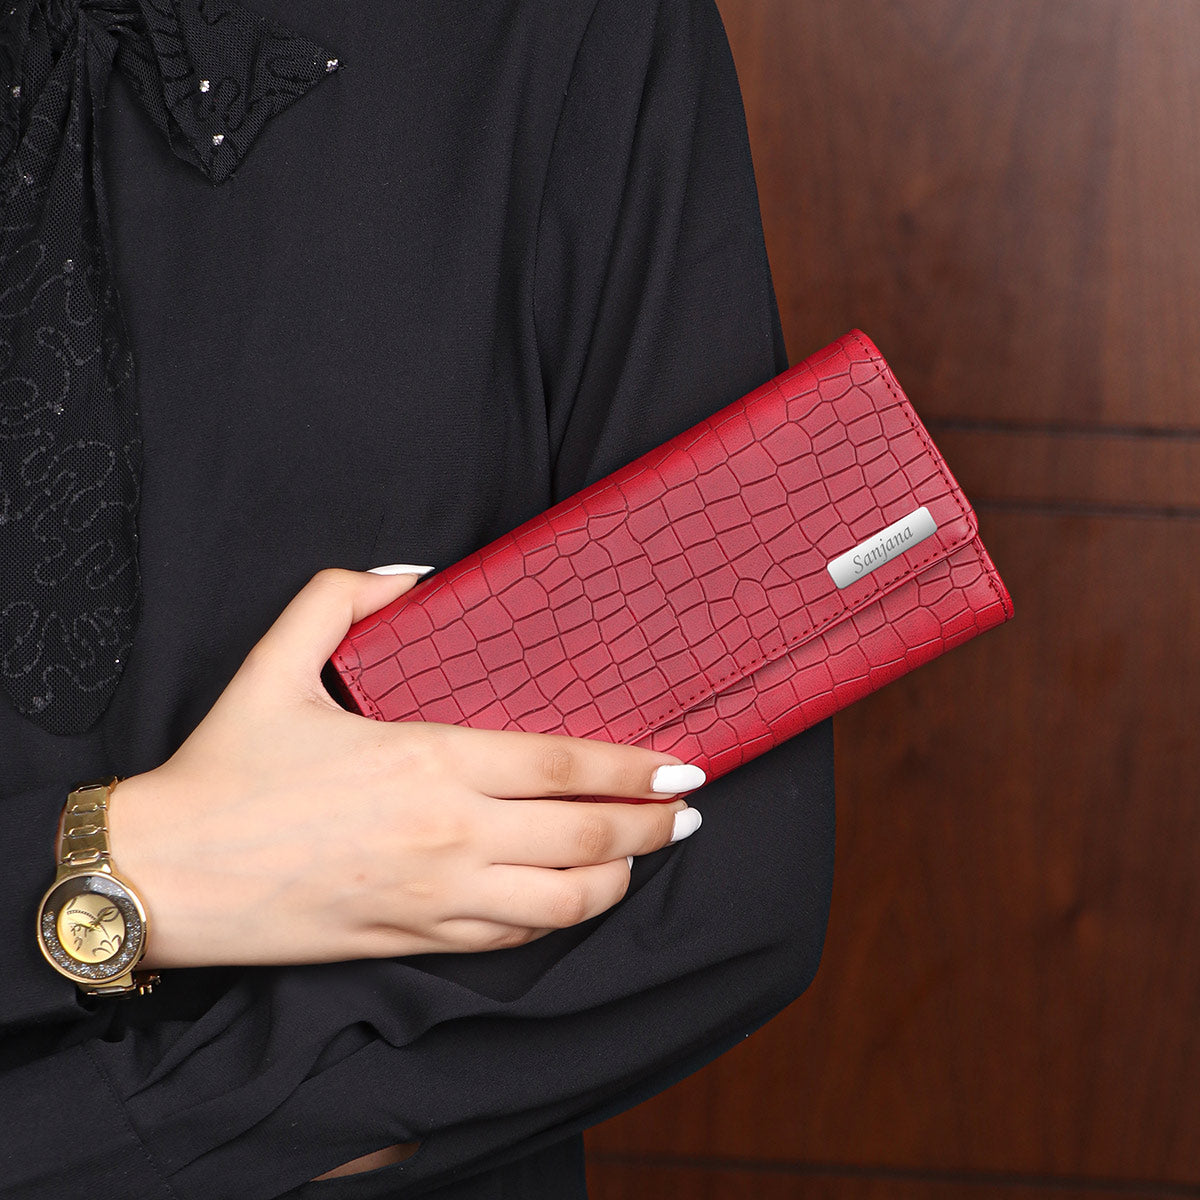 Personalized Brick Design Clutch With Name & Message Card